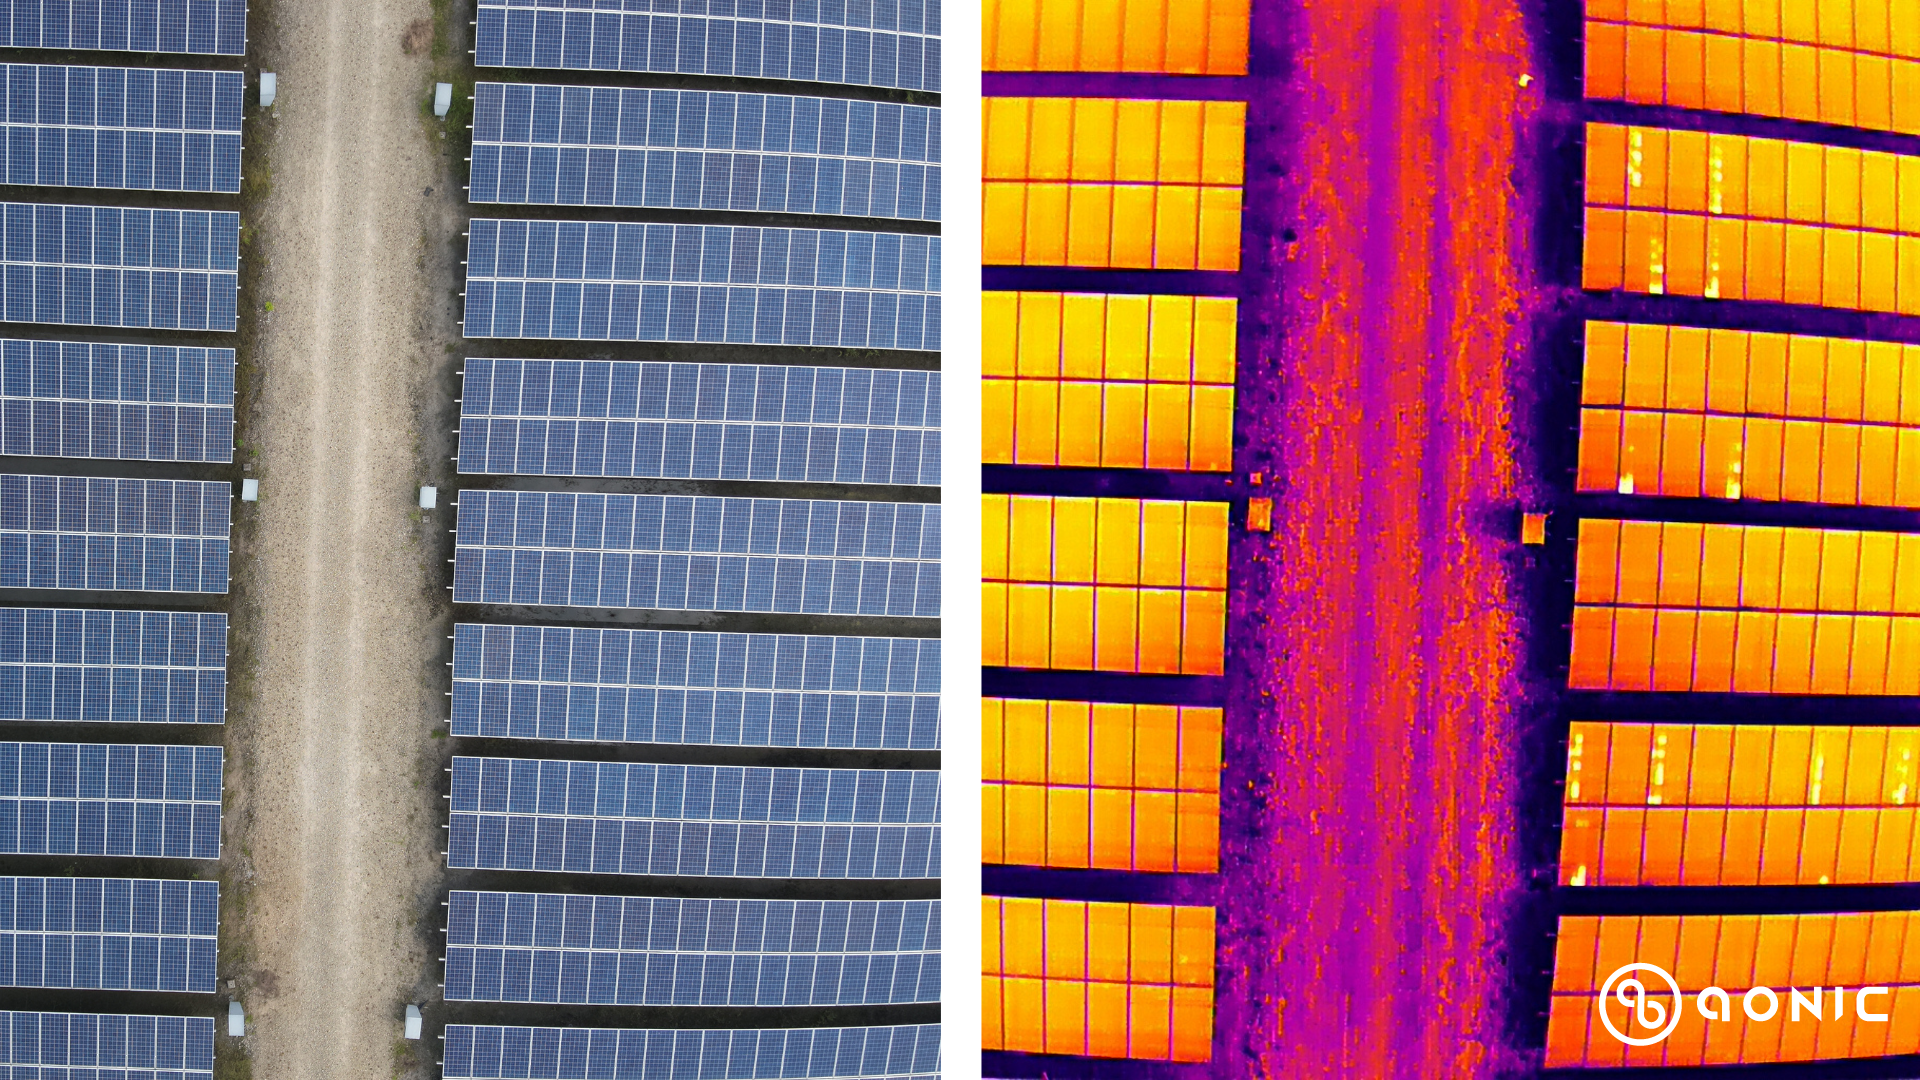 Thermal data side by side comparison with visual image